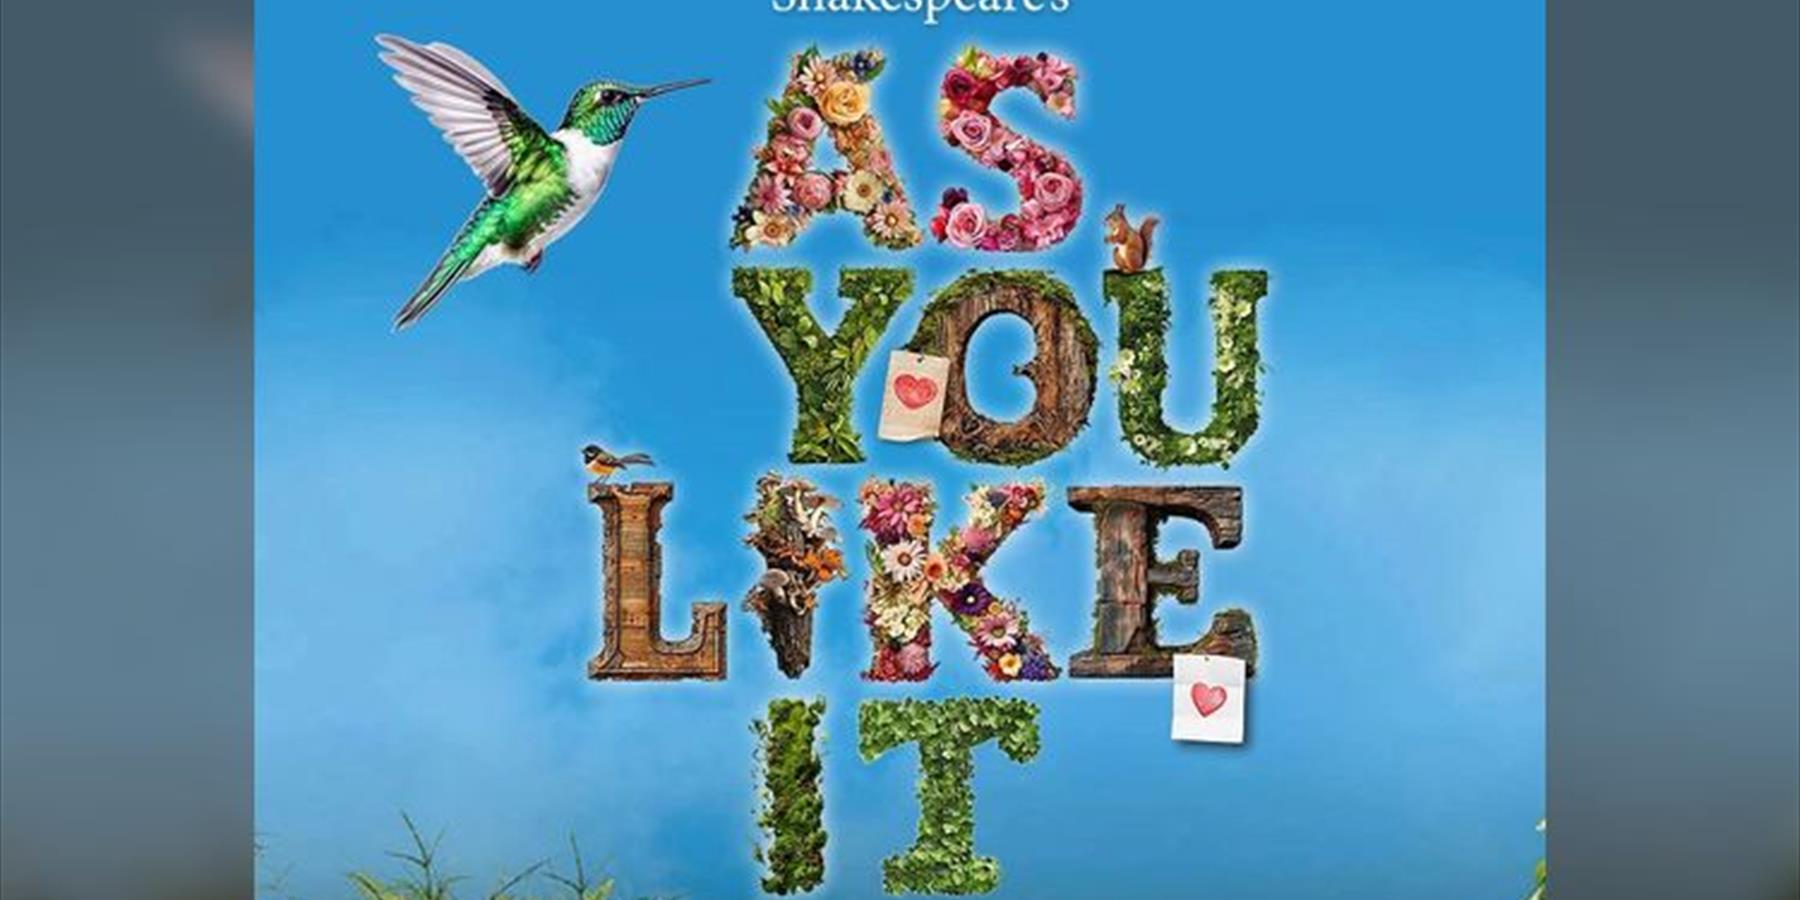 The Dukes Theatre Company presents As You Like It